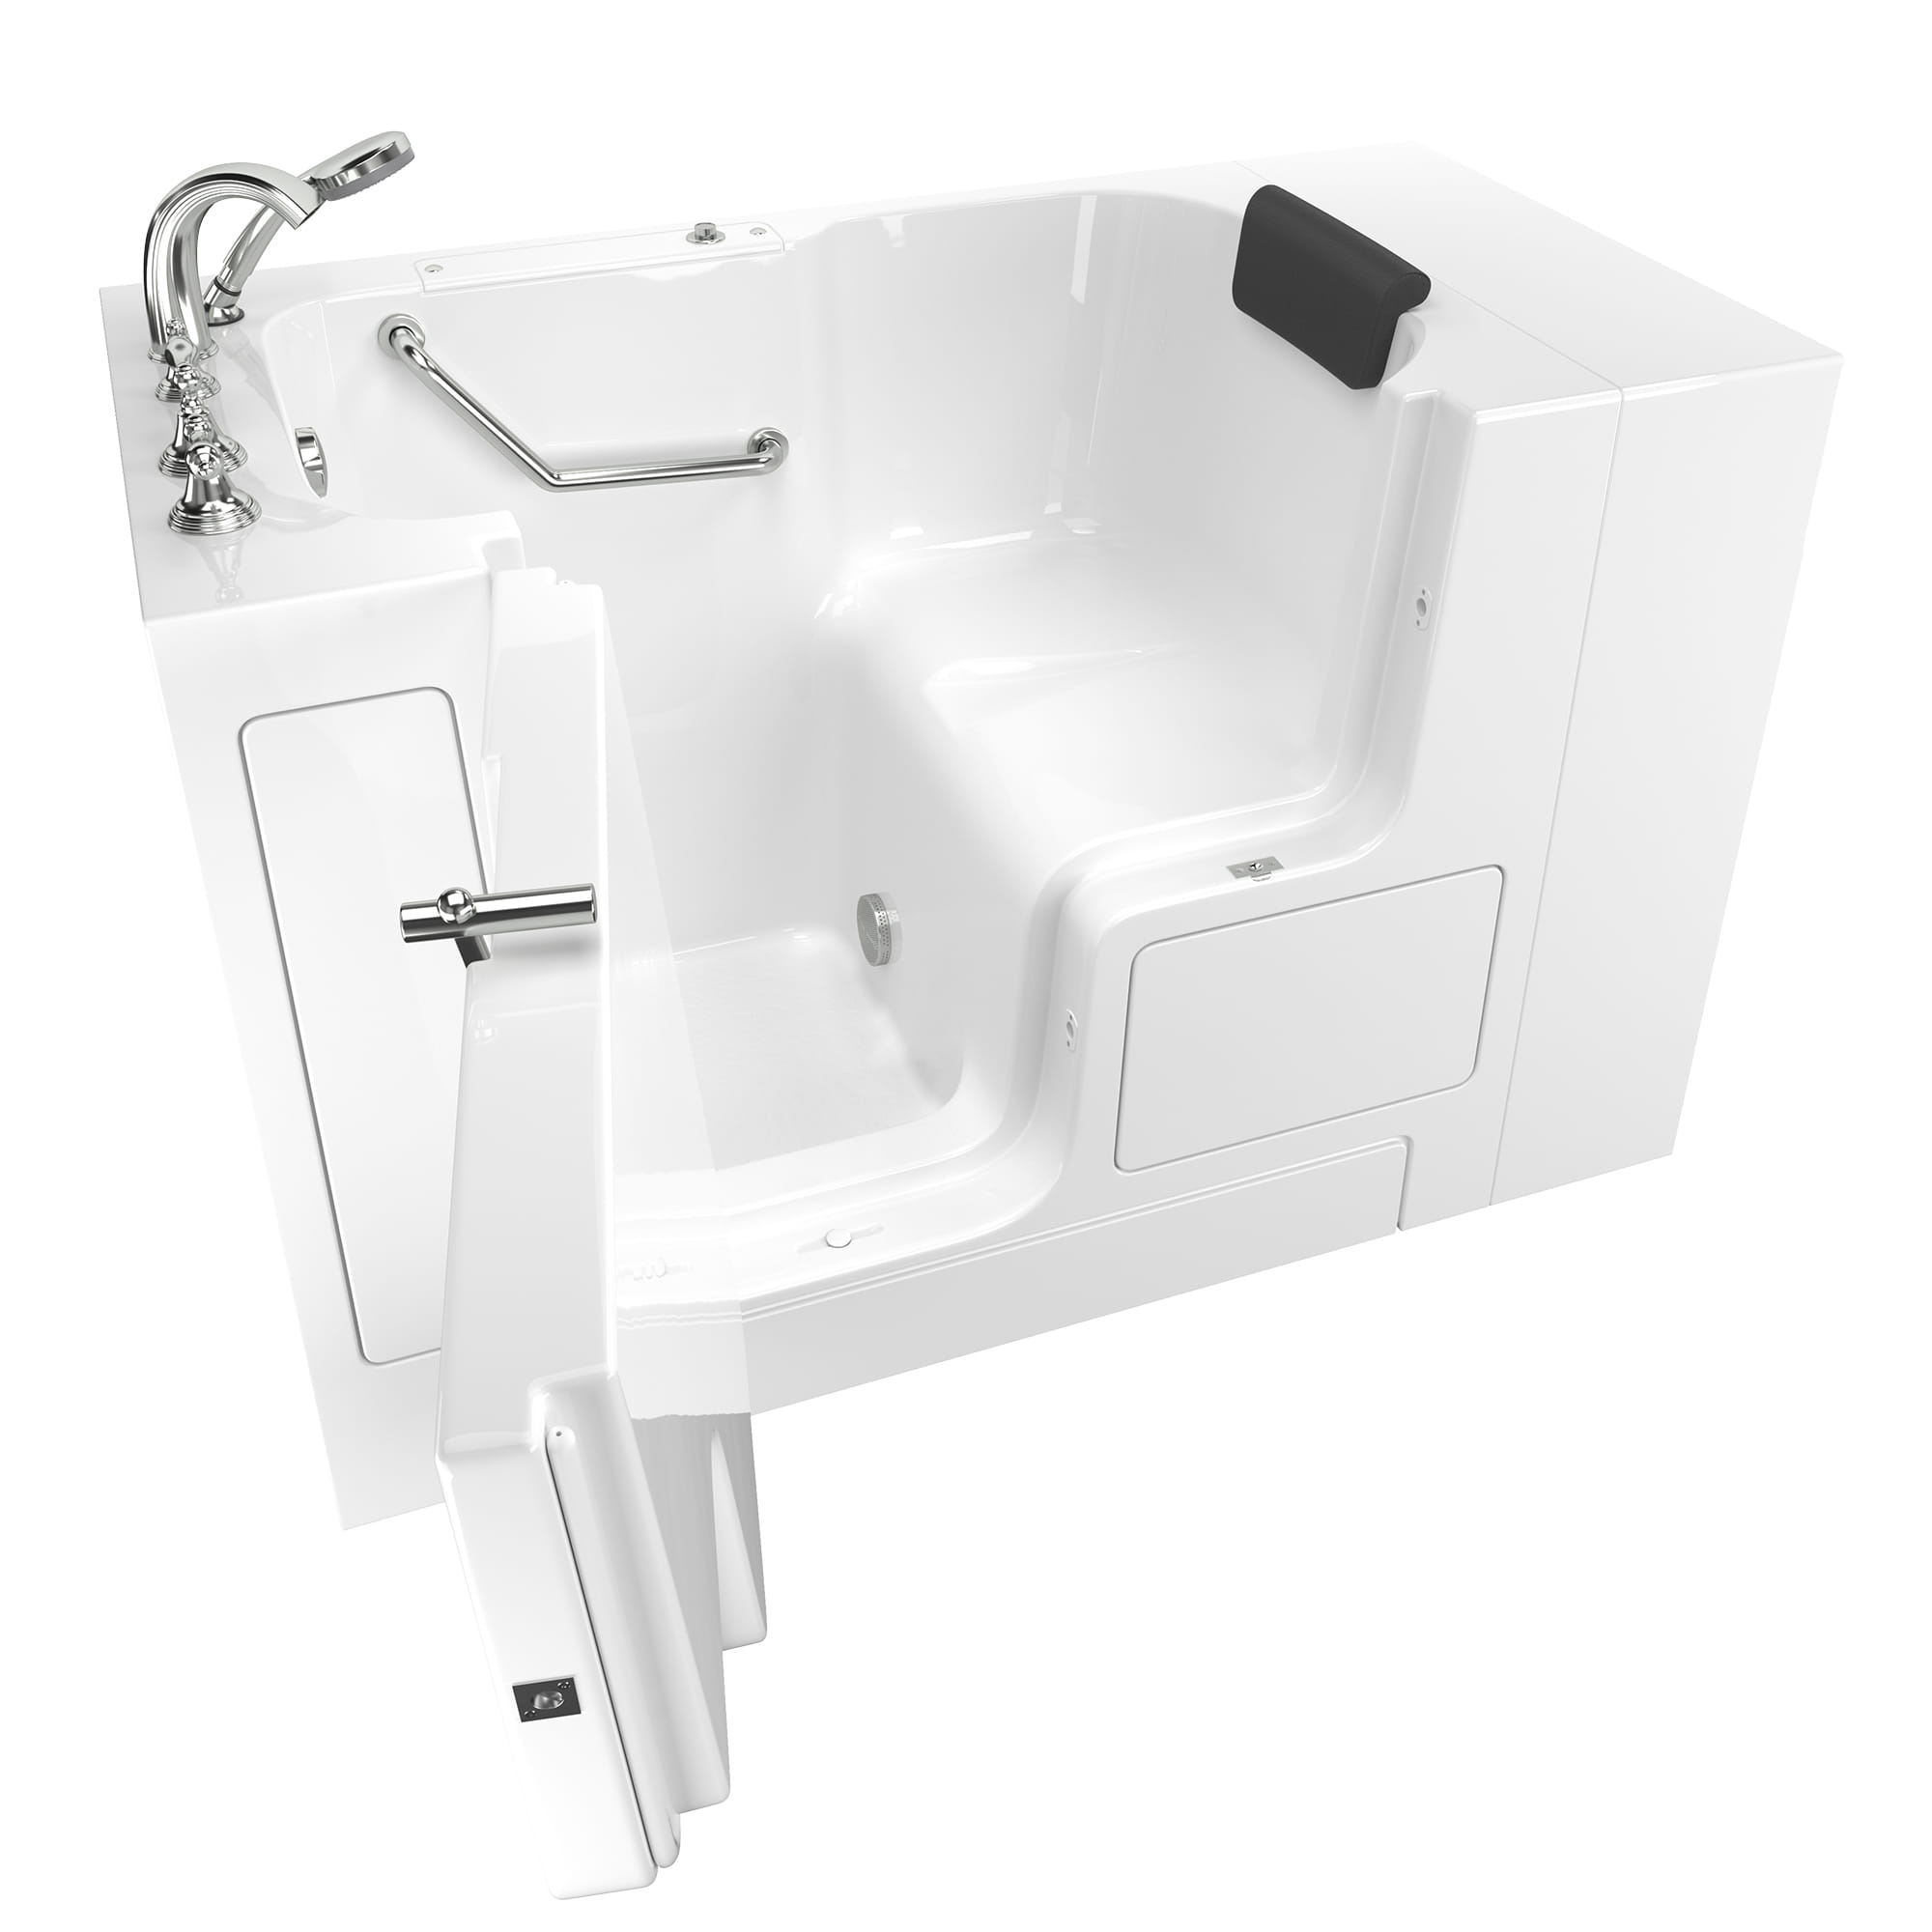 Gelcoat Premium Series 32 x 52 -Inch Walk-in Tub With Soaker System - Left-Hand Drain With Faucet